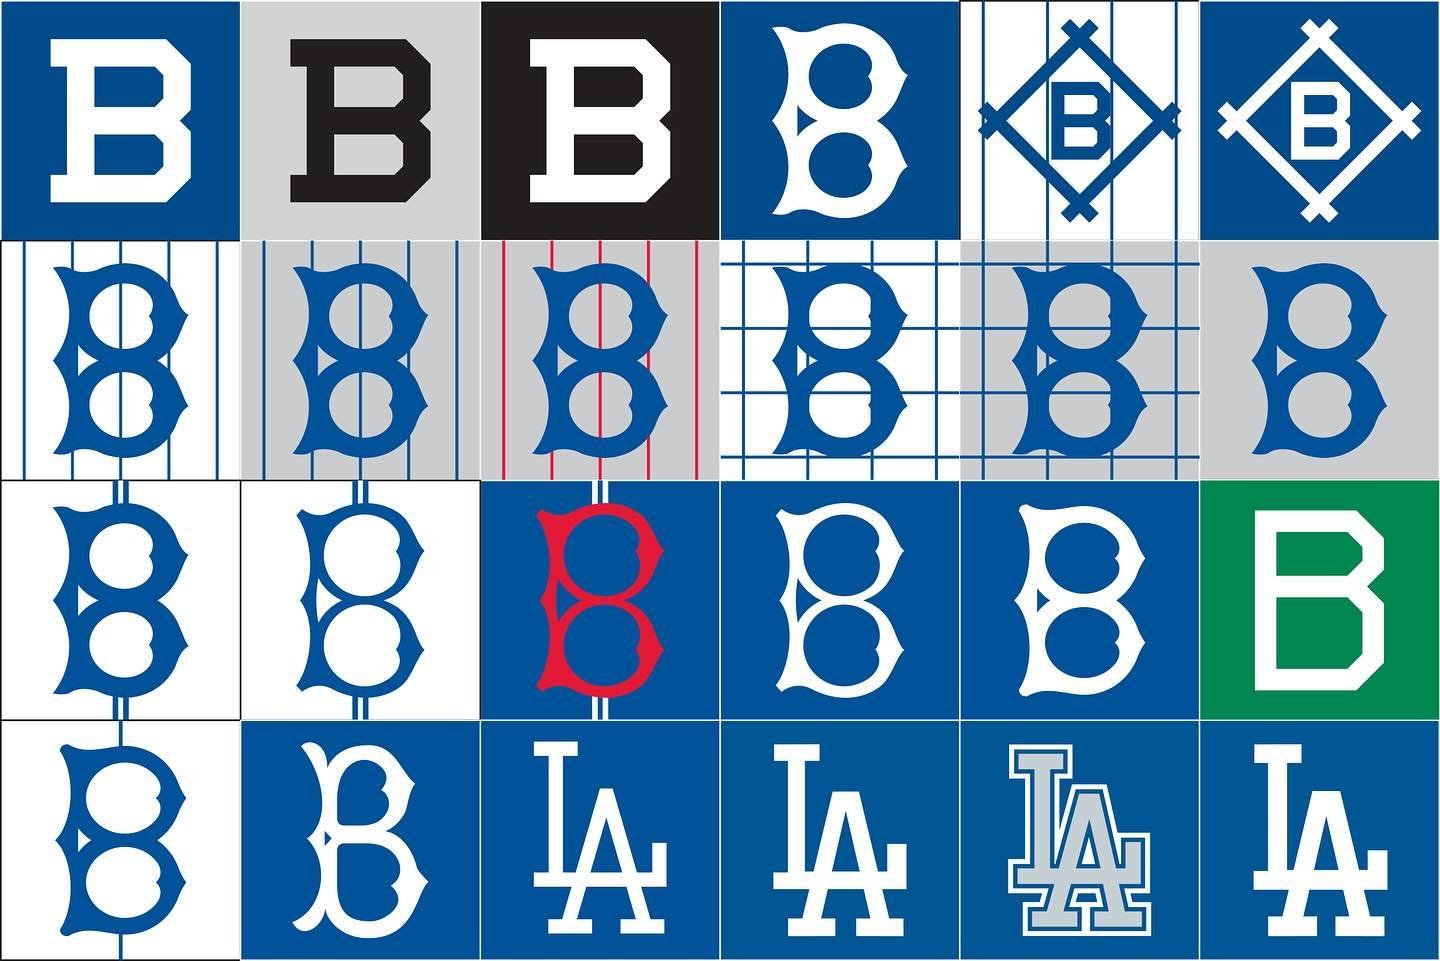 Dodgers cap marks, spanning America, from Brooklyn to Los Angeles. The Dodgers first wore a logo on their lids in 1902, when the club was known as the Brooklyn Superbas. The 1912 caps (upper row at far right, a B in a diamond) went hard. In 1937, thi